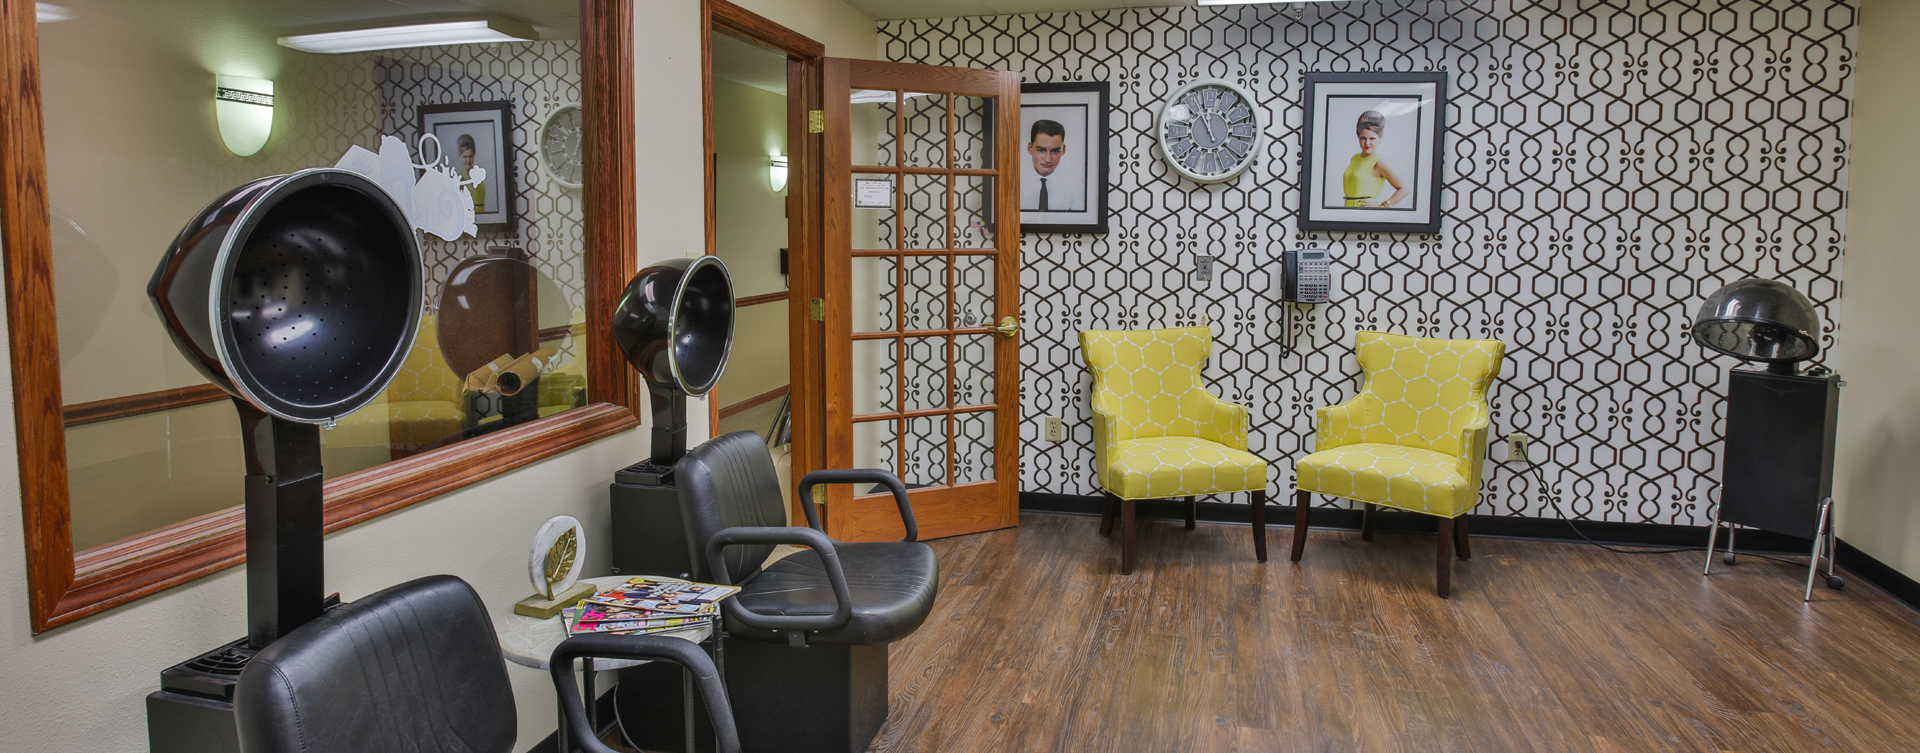 Receive personalized, at-home treatment from our stylist in the salon at Bickford of Peoria